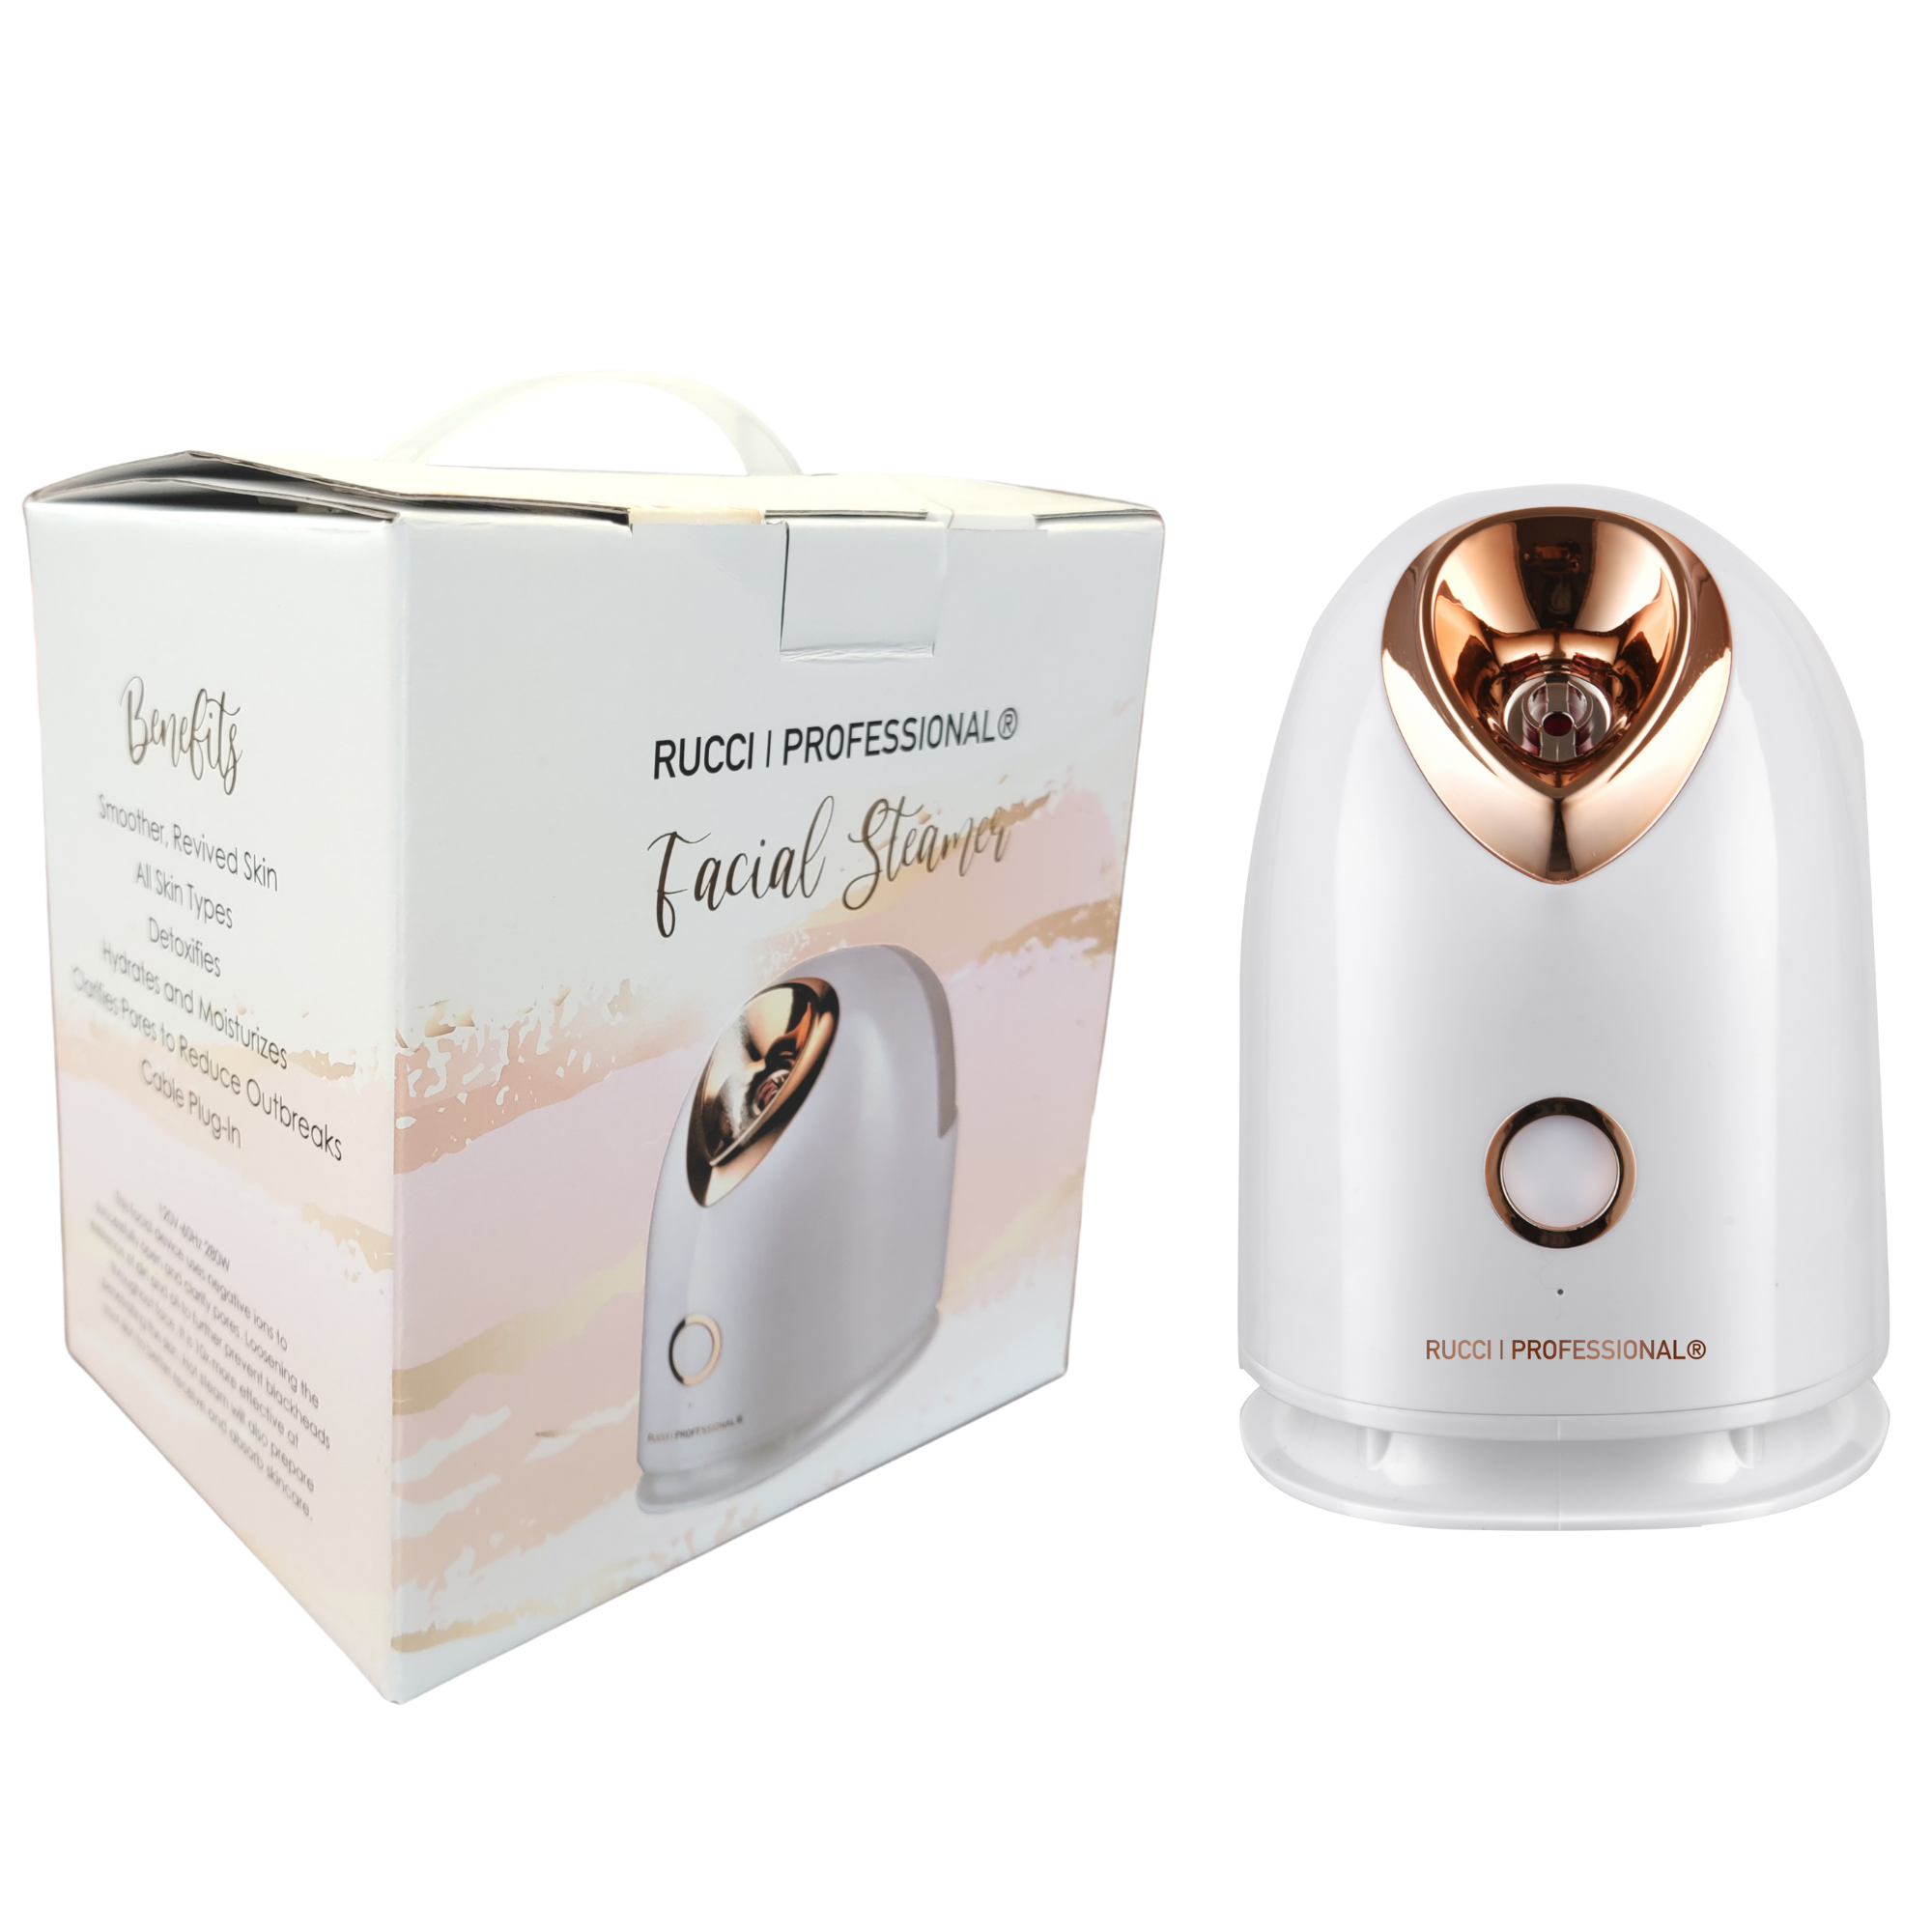 Rucci Professional One-Touch Operation Facial Steamer with Exceptionally-Fine Steam (FS101)